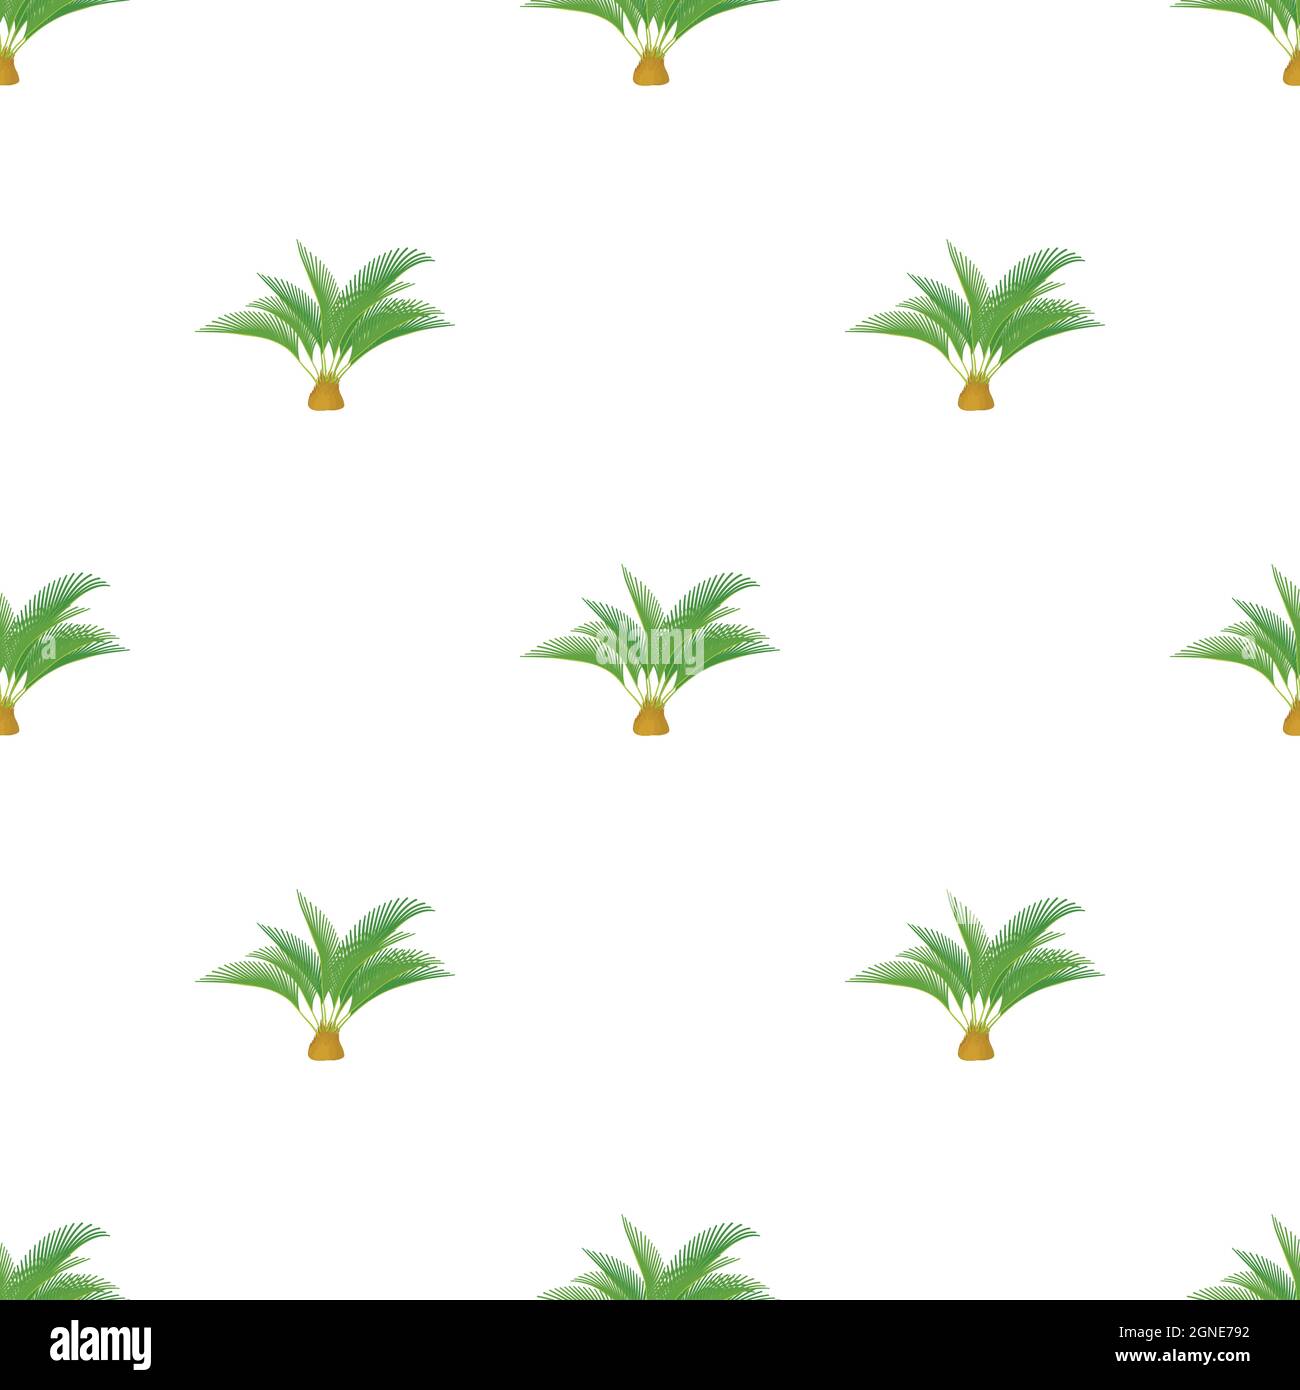 Small palm tree pattern seamless background texture repeat wallpaper ...